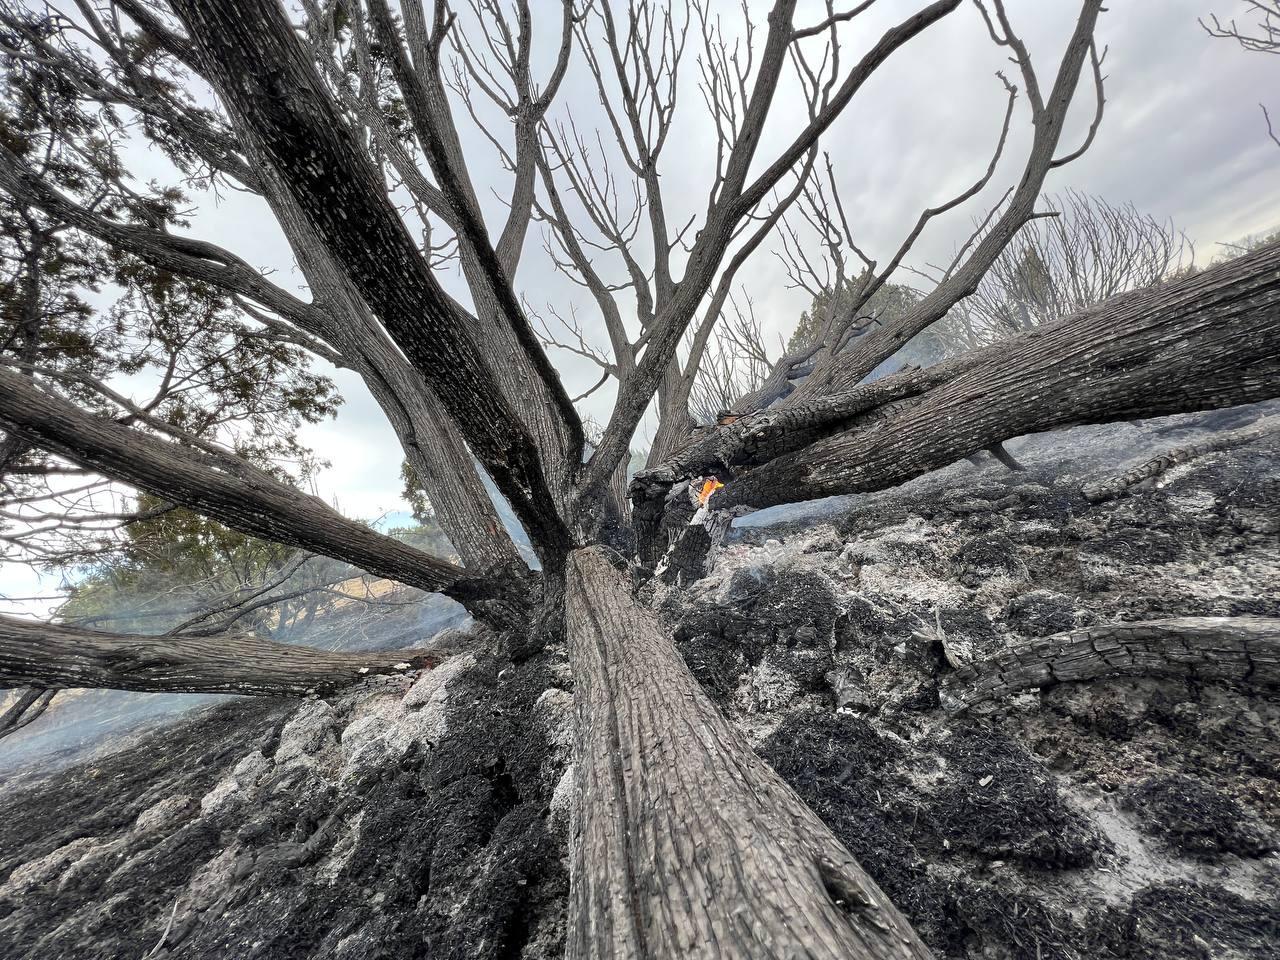 Closeup image of a burned tree with multiple branches, blackened soil and a small orange flame at the base